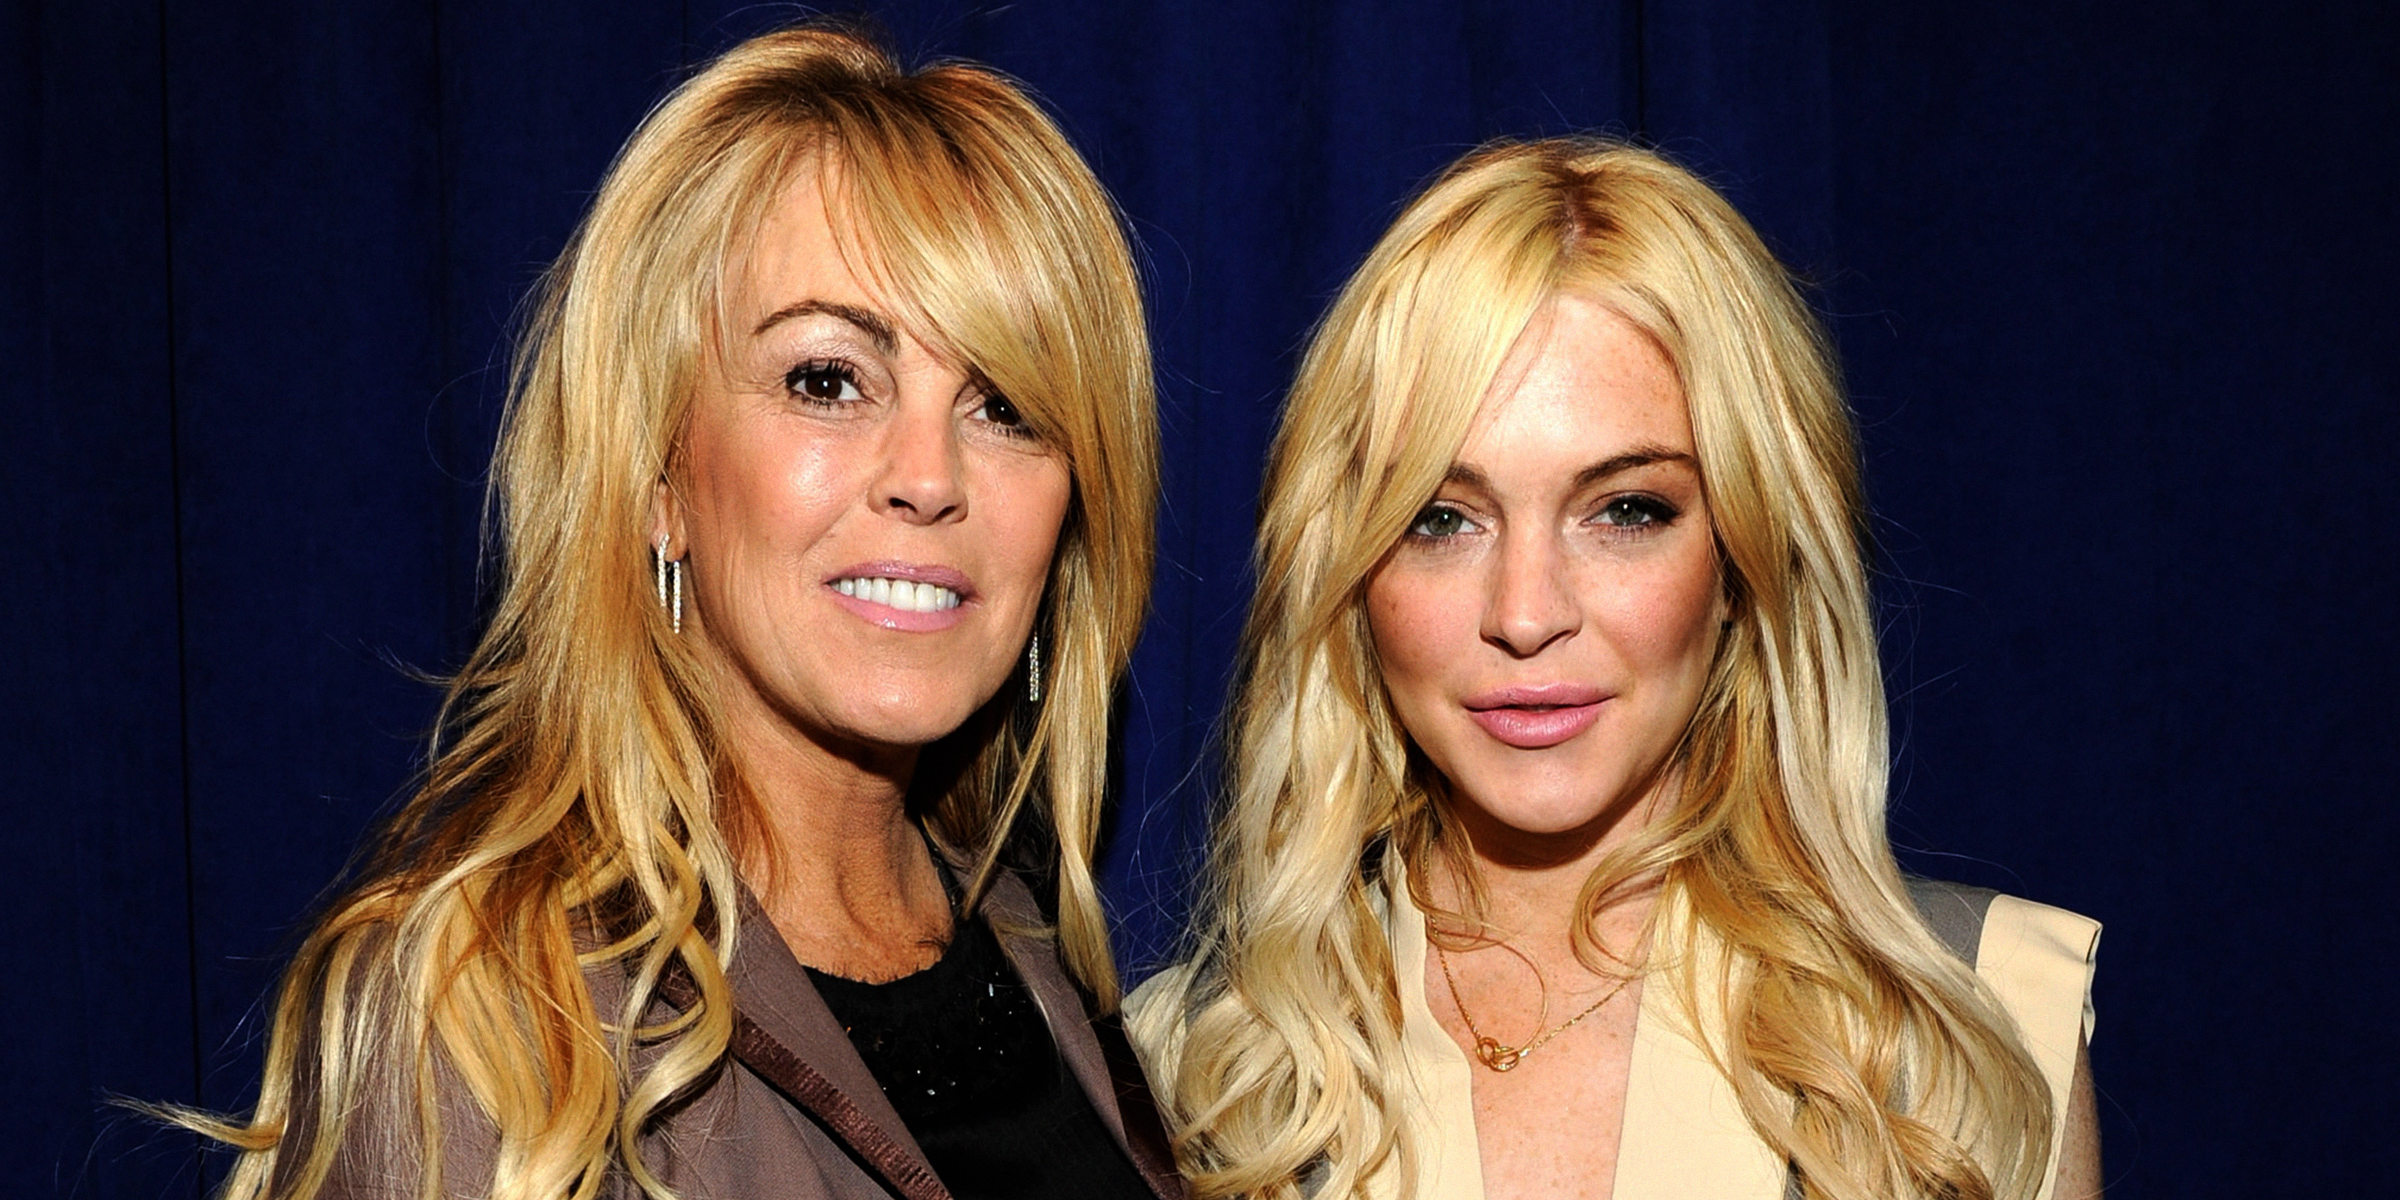 Lindsay Lohan with her mother, Dina Lohan. | Getty Images